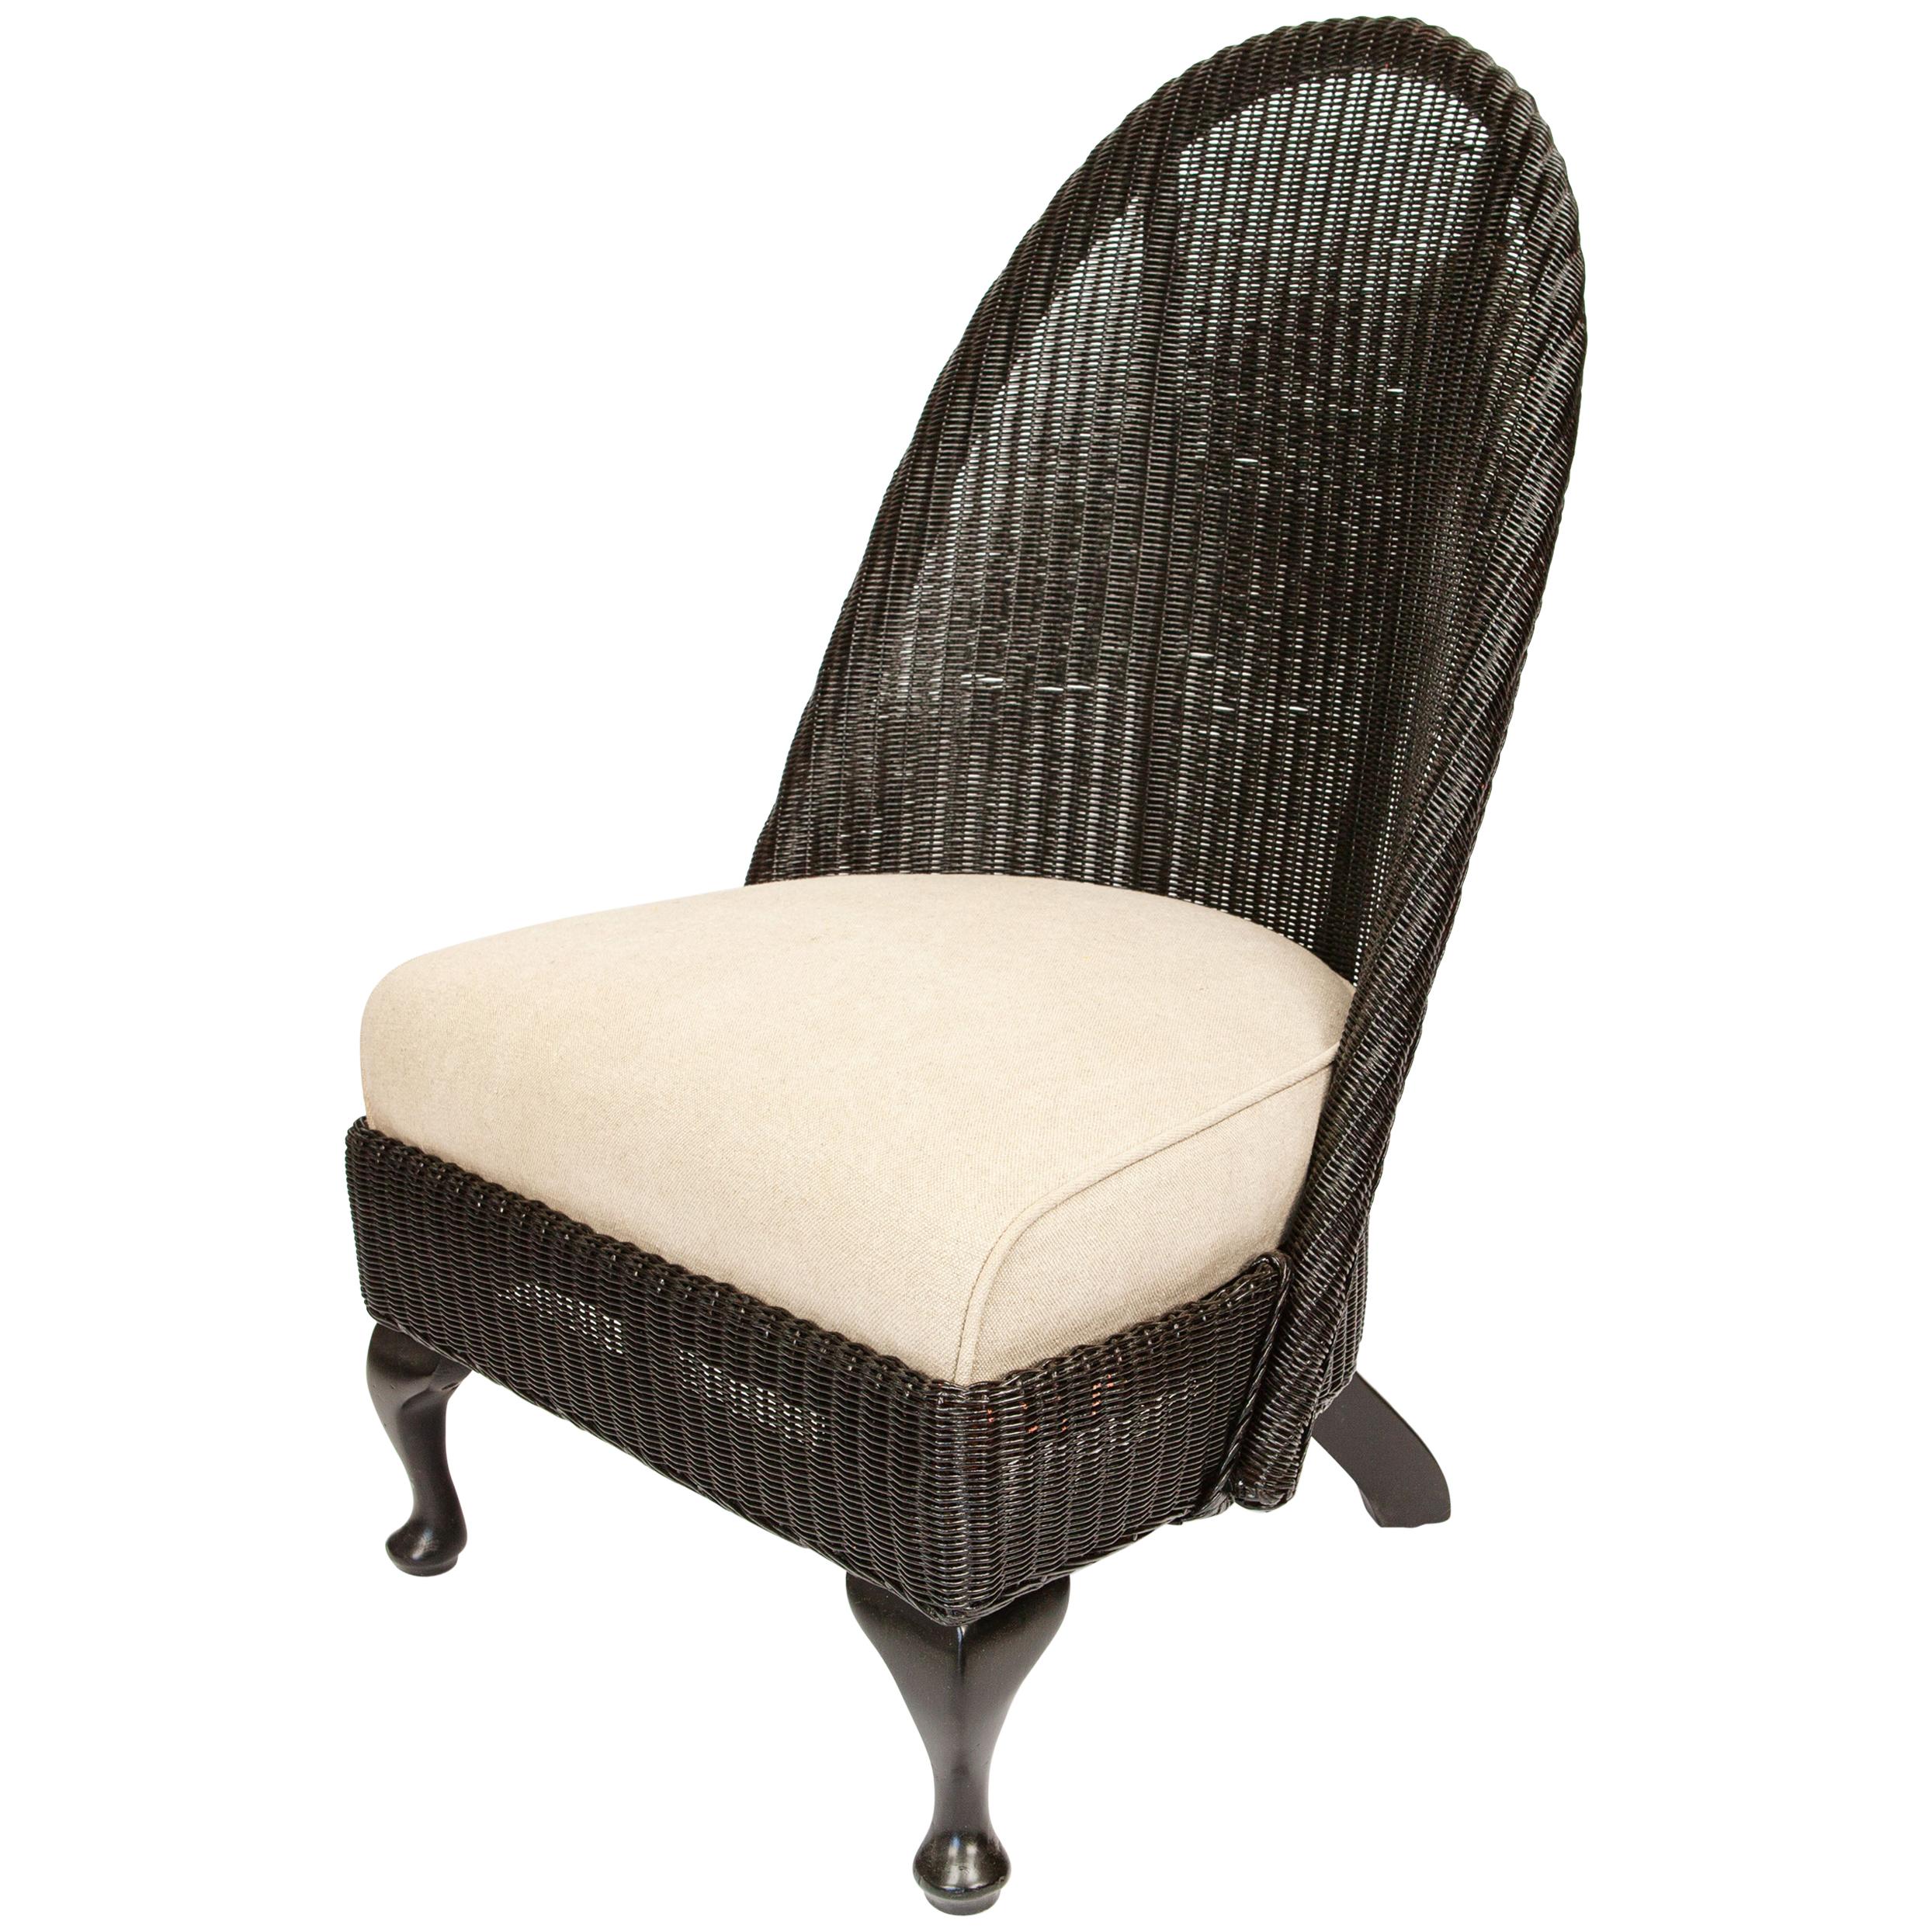 Antique Lloyd Loom Wicker Slipper Chair, Newly Painted in Black Lacquer